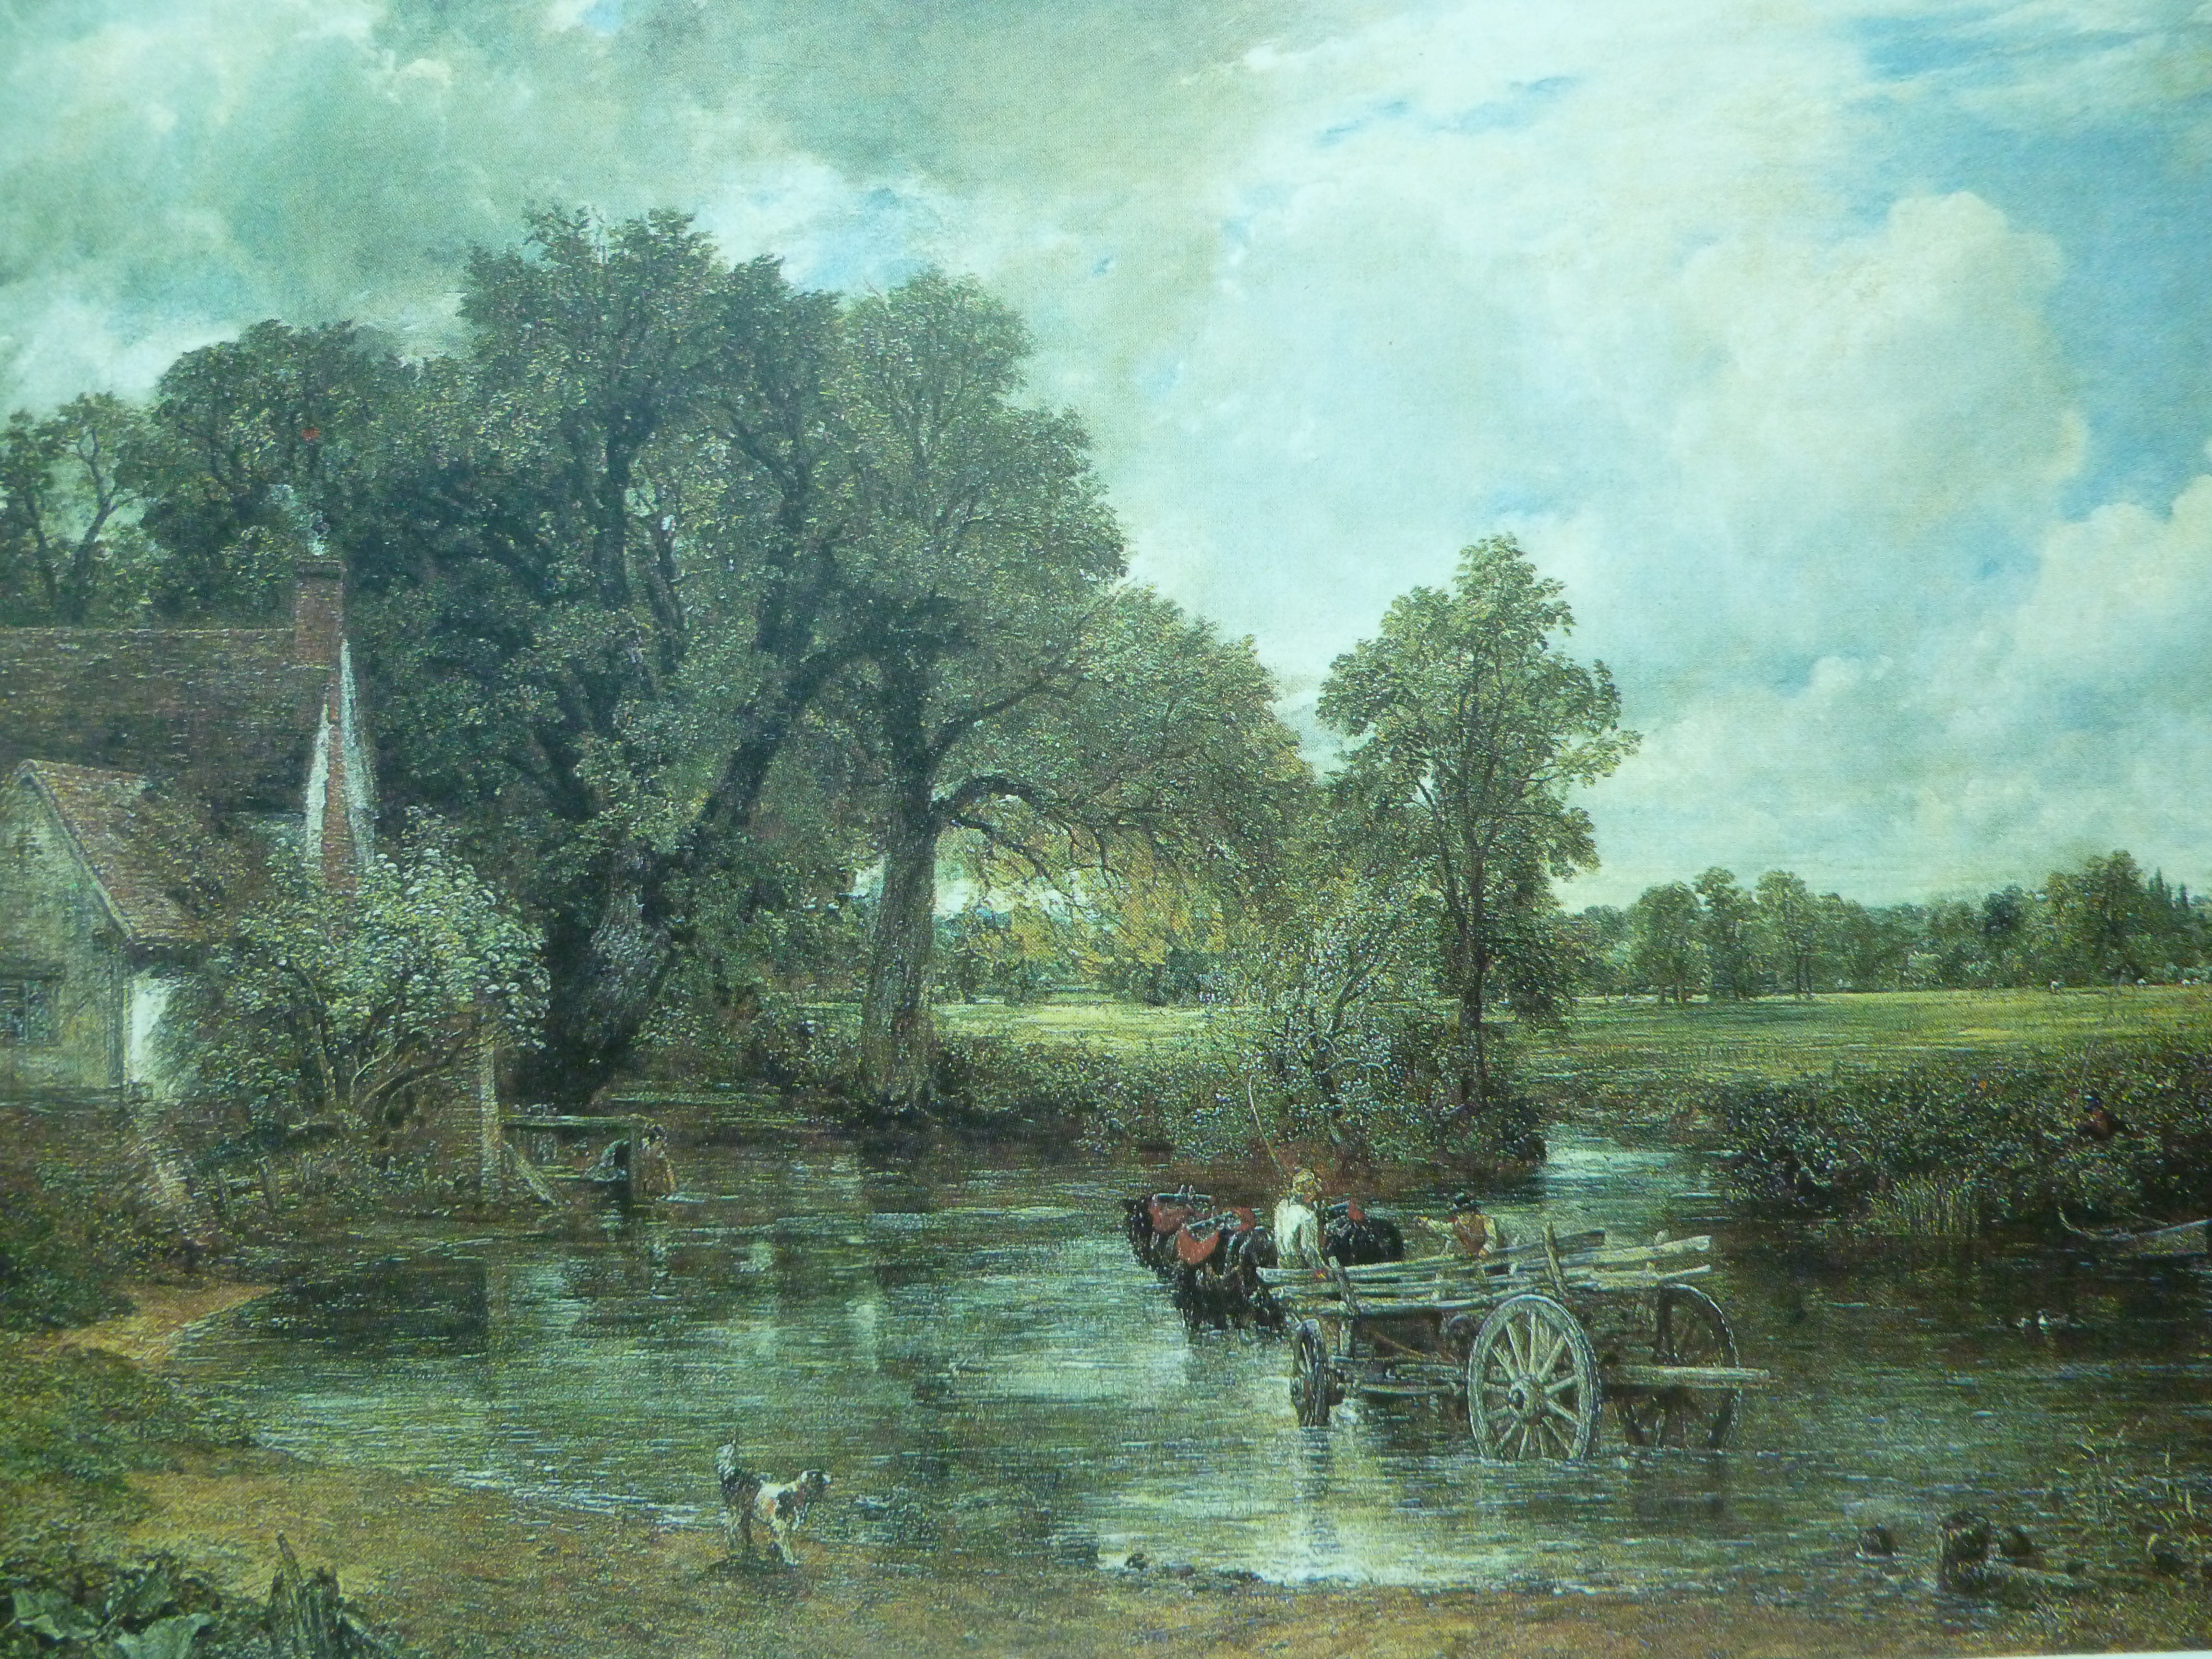 The Hay Wain is a romantic idyl for us today, but in its time the painting was a rural reality, and this may explain why it didn't sell when first exhibited - it wasn't romantic enough for the period in which it was painted.